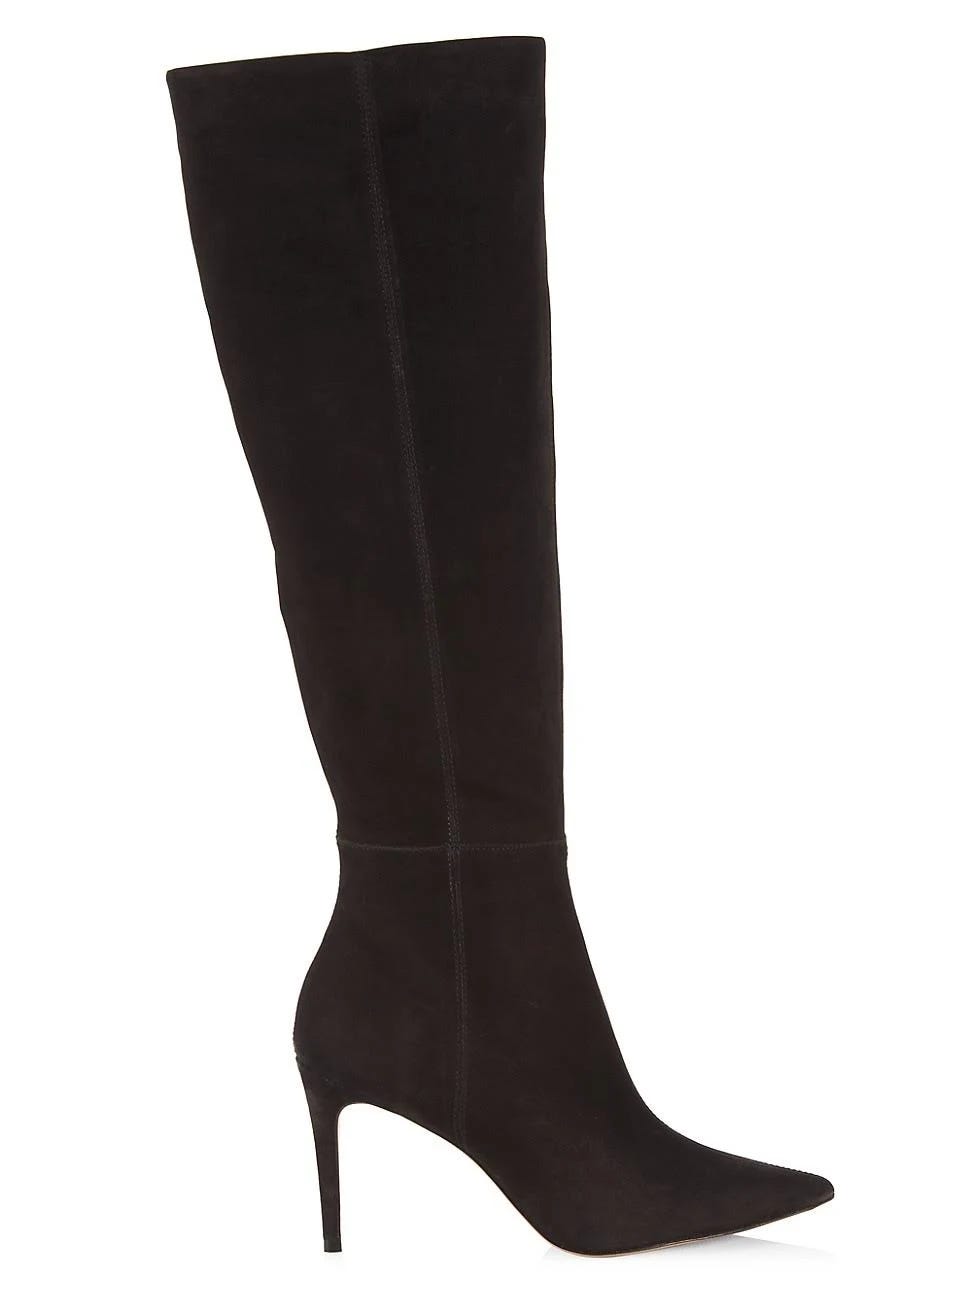 Luxury Suede Stiletto Knee-High Boots - Black, Size 6.5 | Image